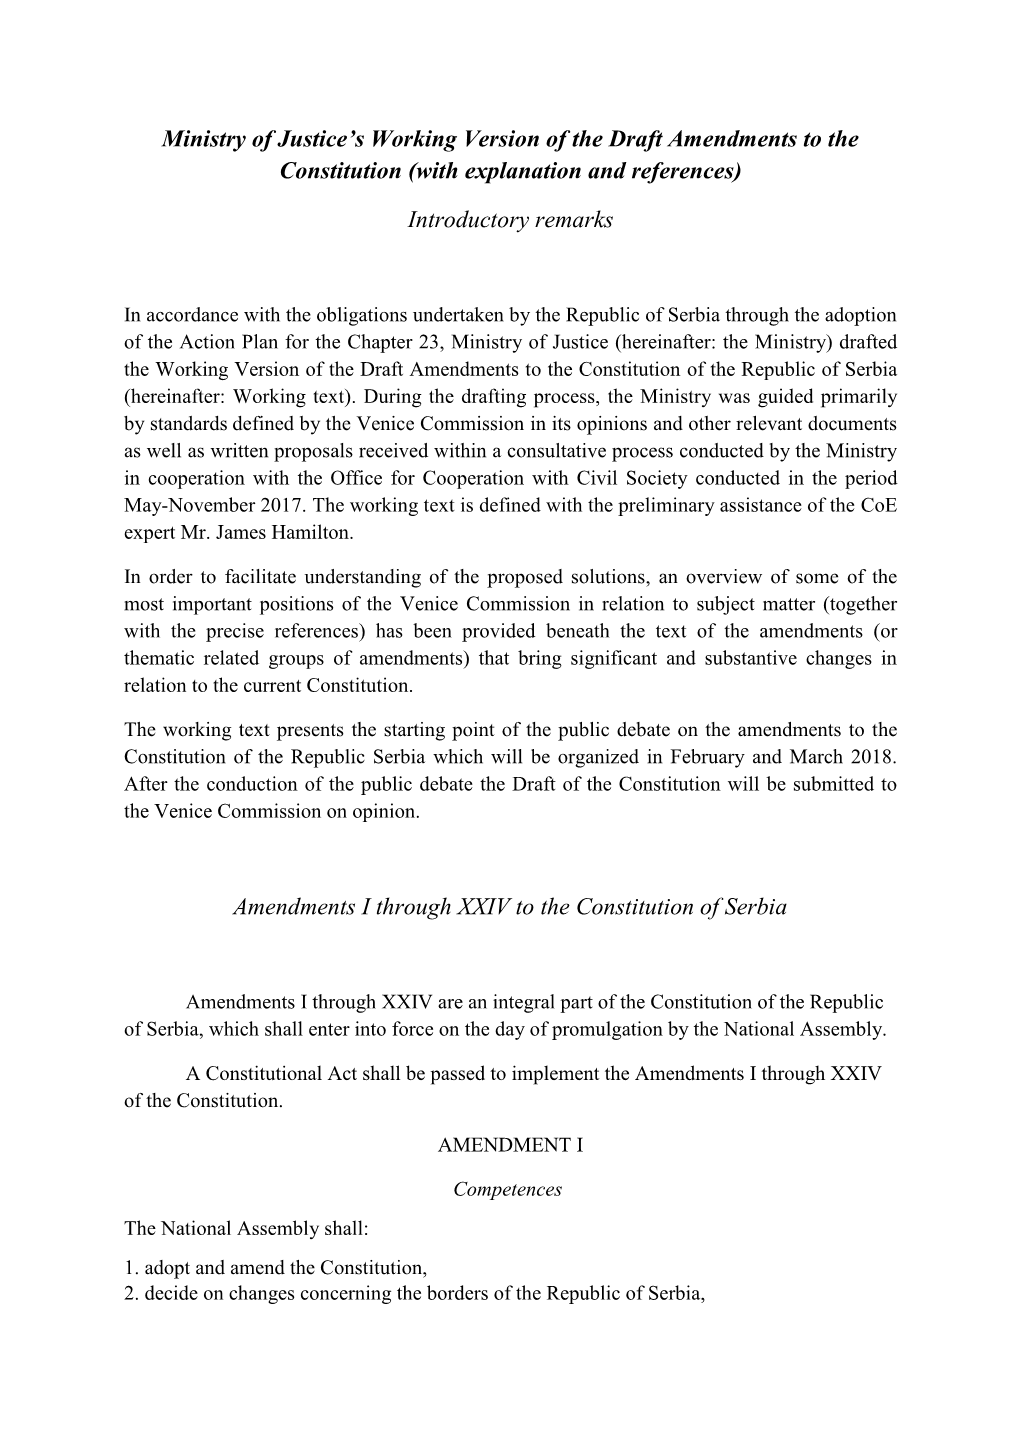 Working Draft of Amendments to the Constitution of the Republic of Serbia